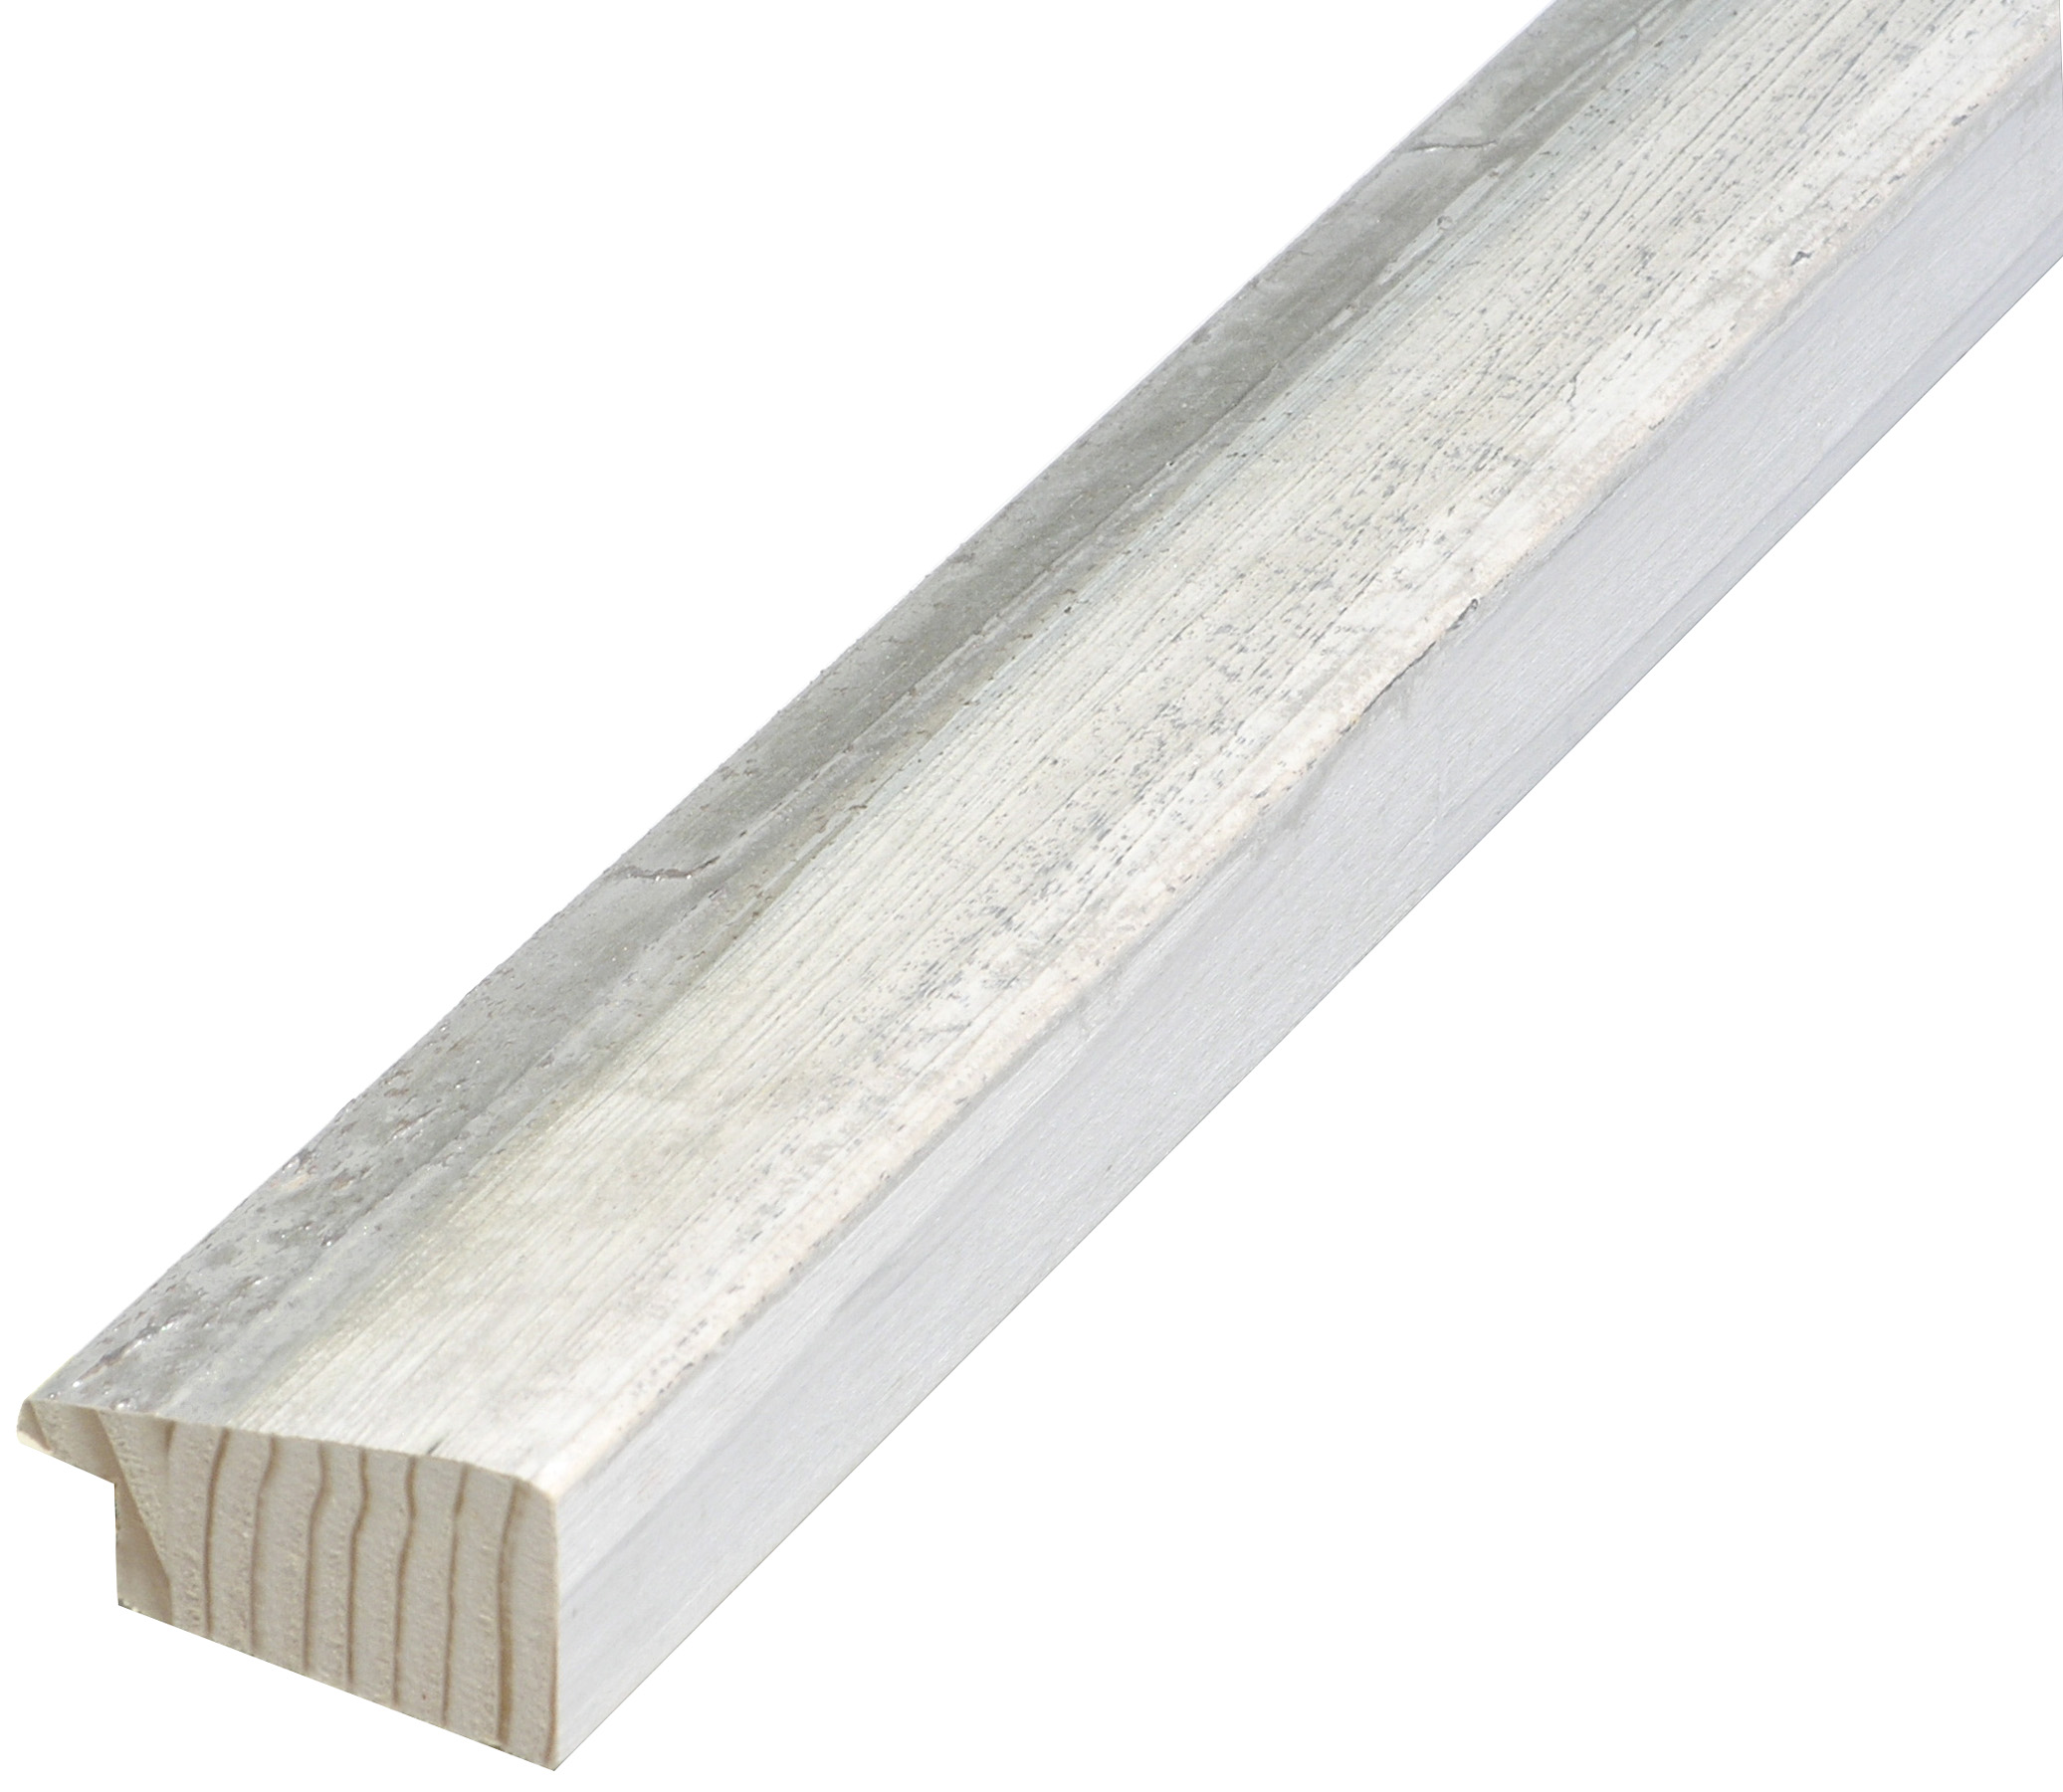 Moulding finger-jointed fir 37mm - distressed white finish, silver edg